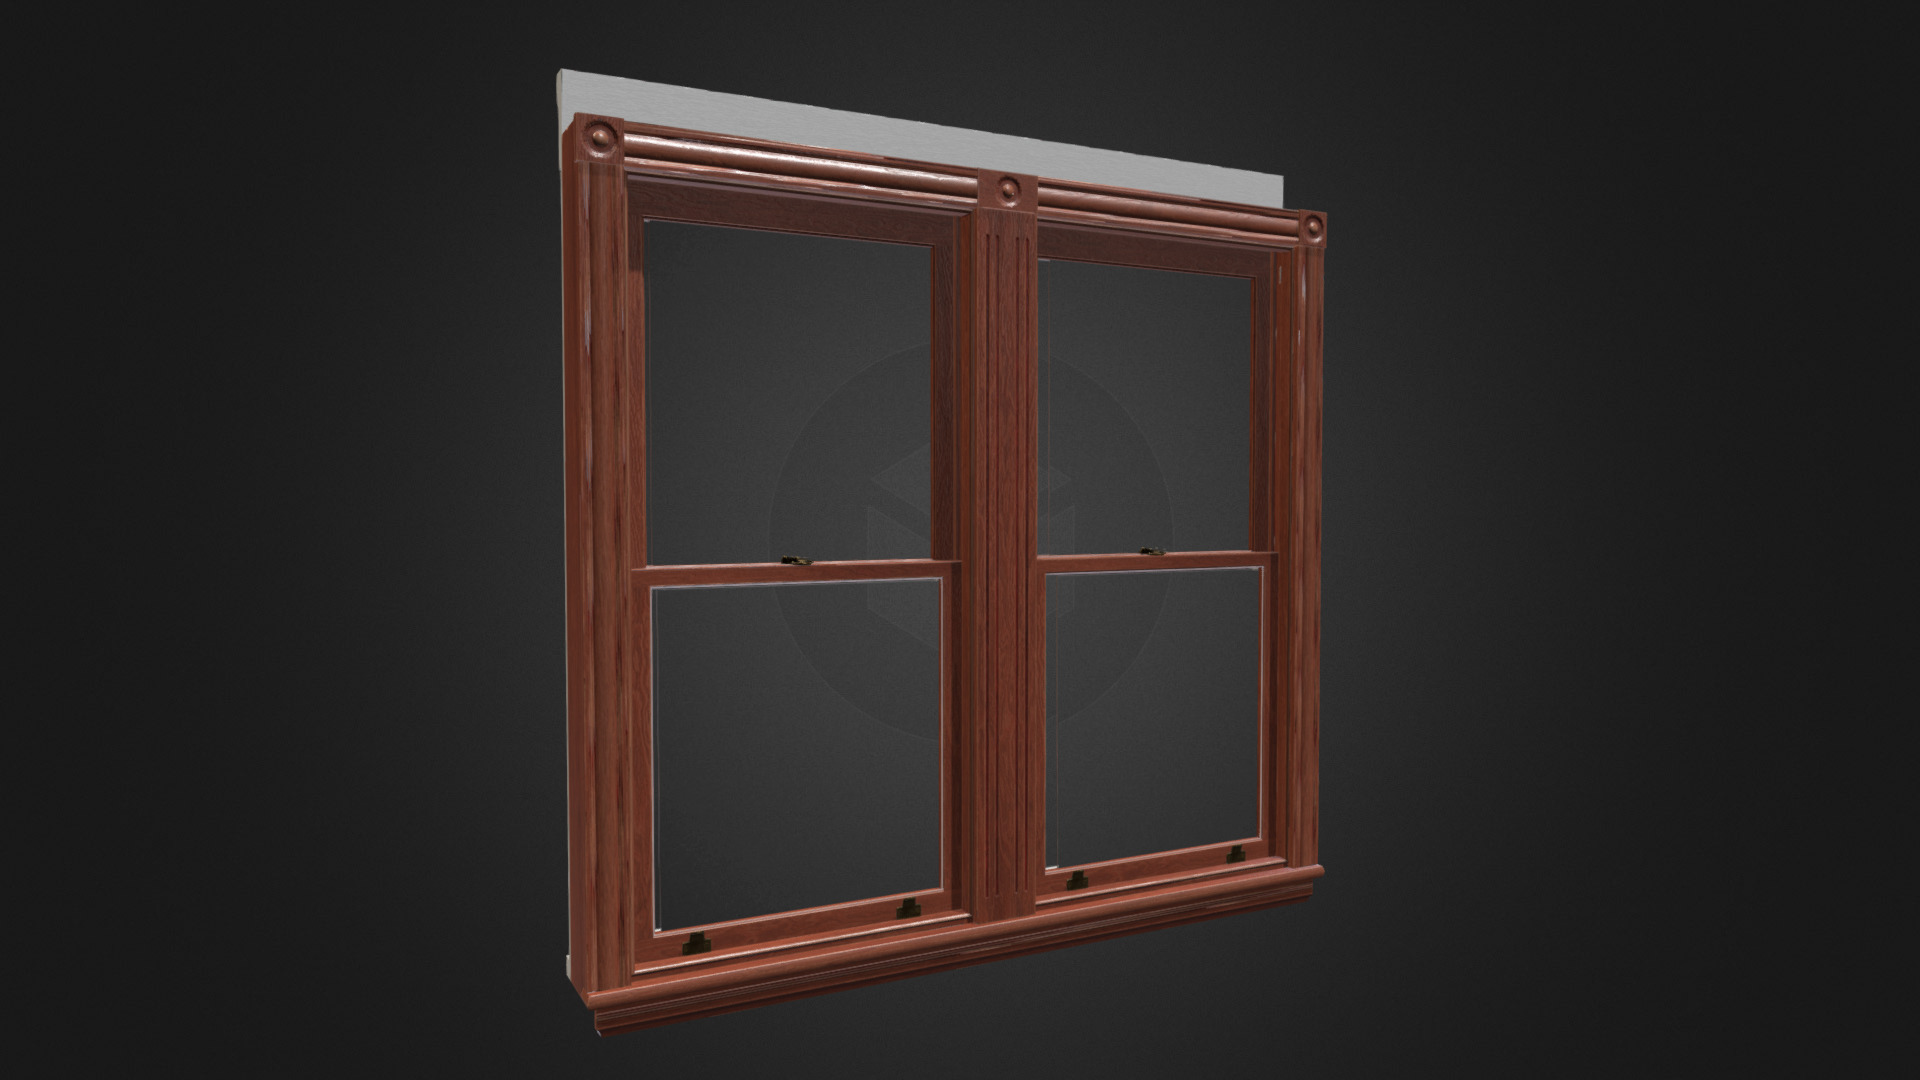 3D model 34in 2- Light Double Low - This is a 3D model of the 34in 2- Light Double Low. The 3D model is about a window with a wooden frame.